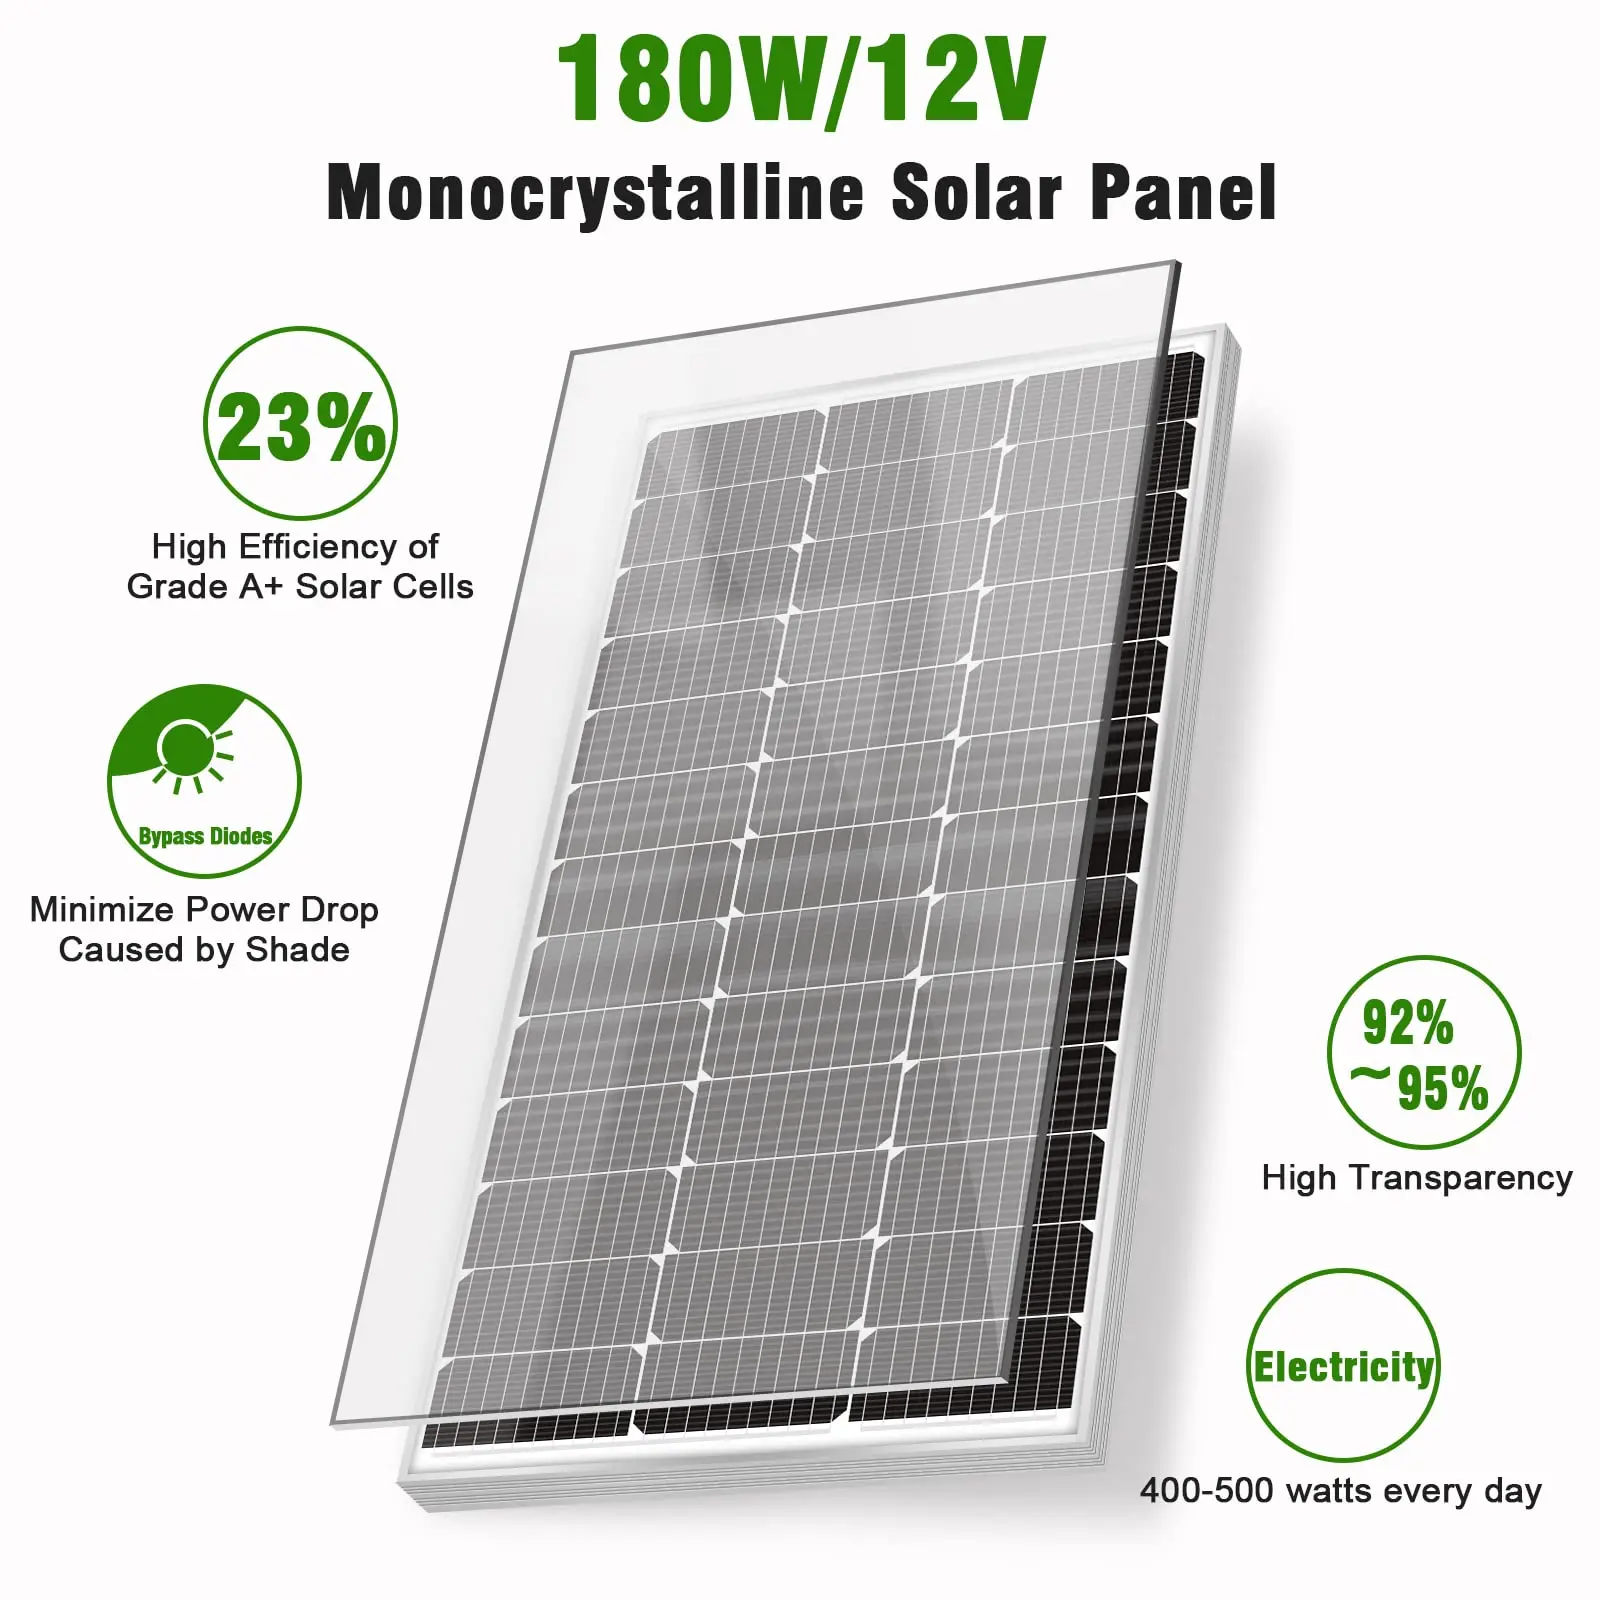 180w solar panel specifications - How many amps is a 180W panel